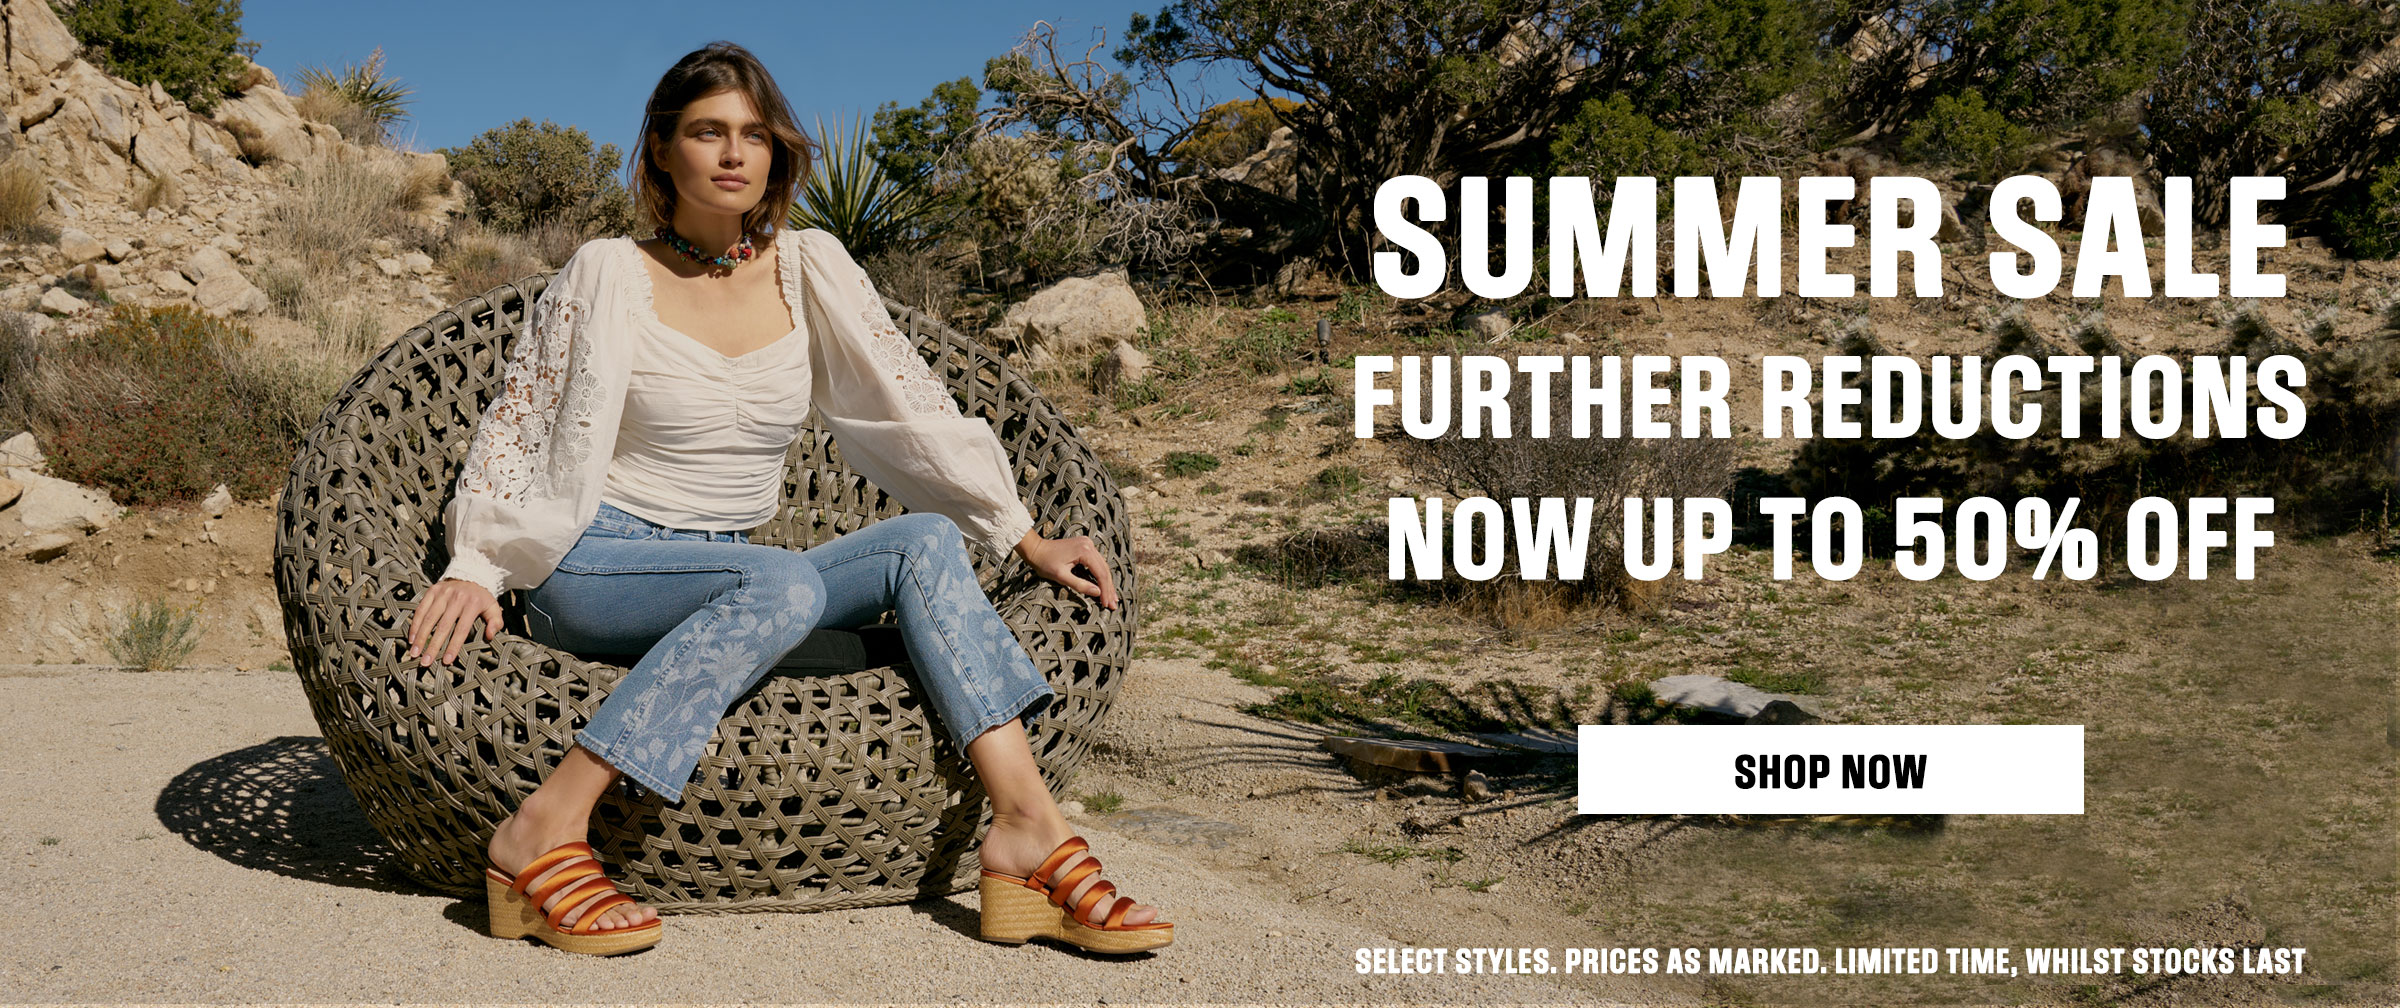 Summer Sale Now Up to 50% Off Select Styles